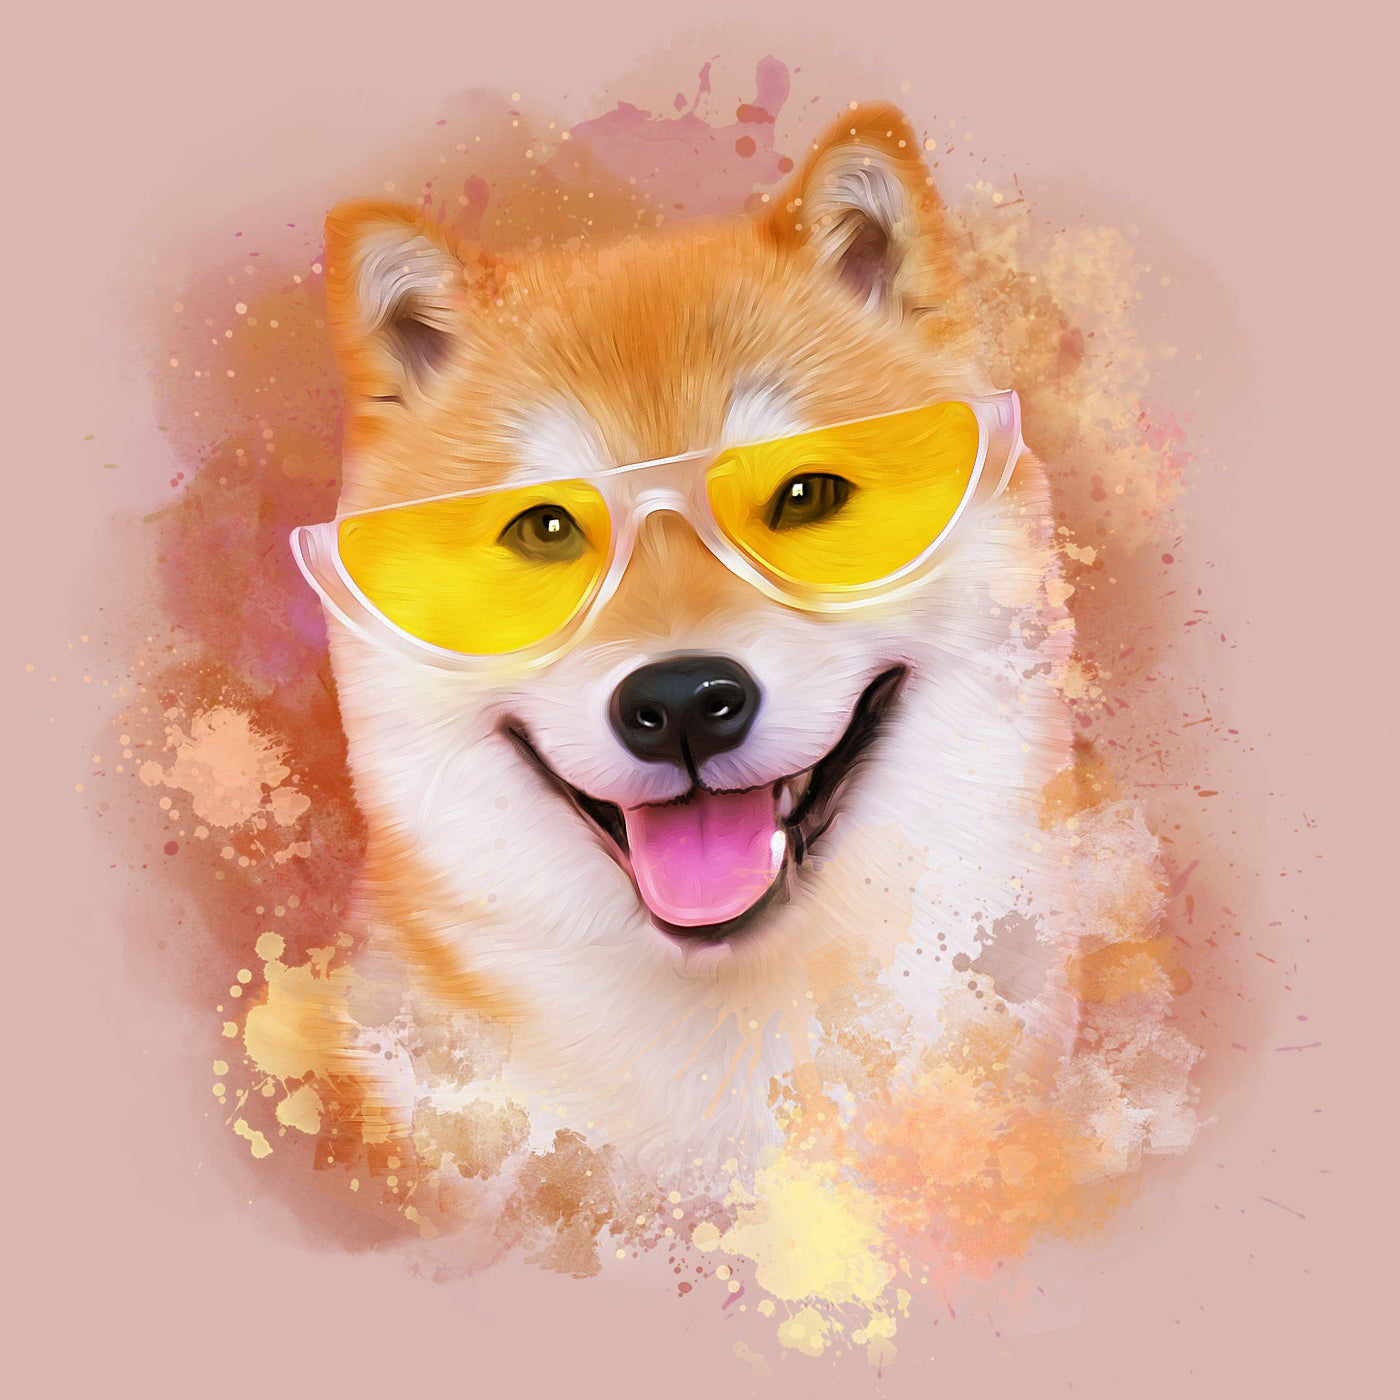 dog watercolor painting of a dog with orange and white fur, wearing yellow glasses